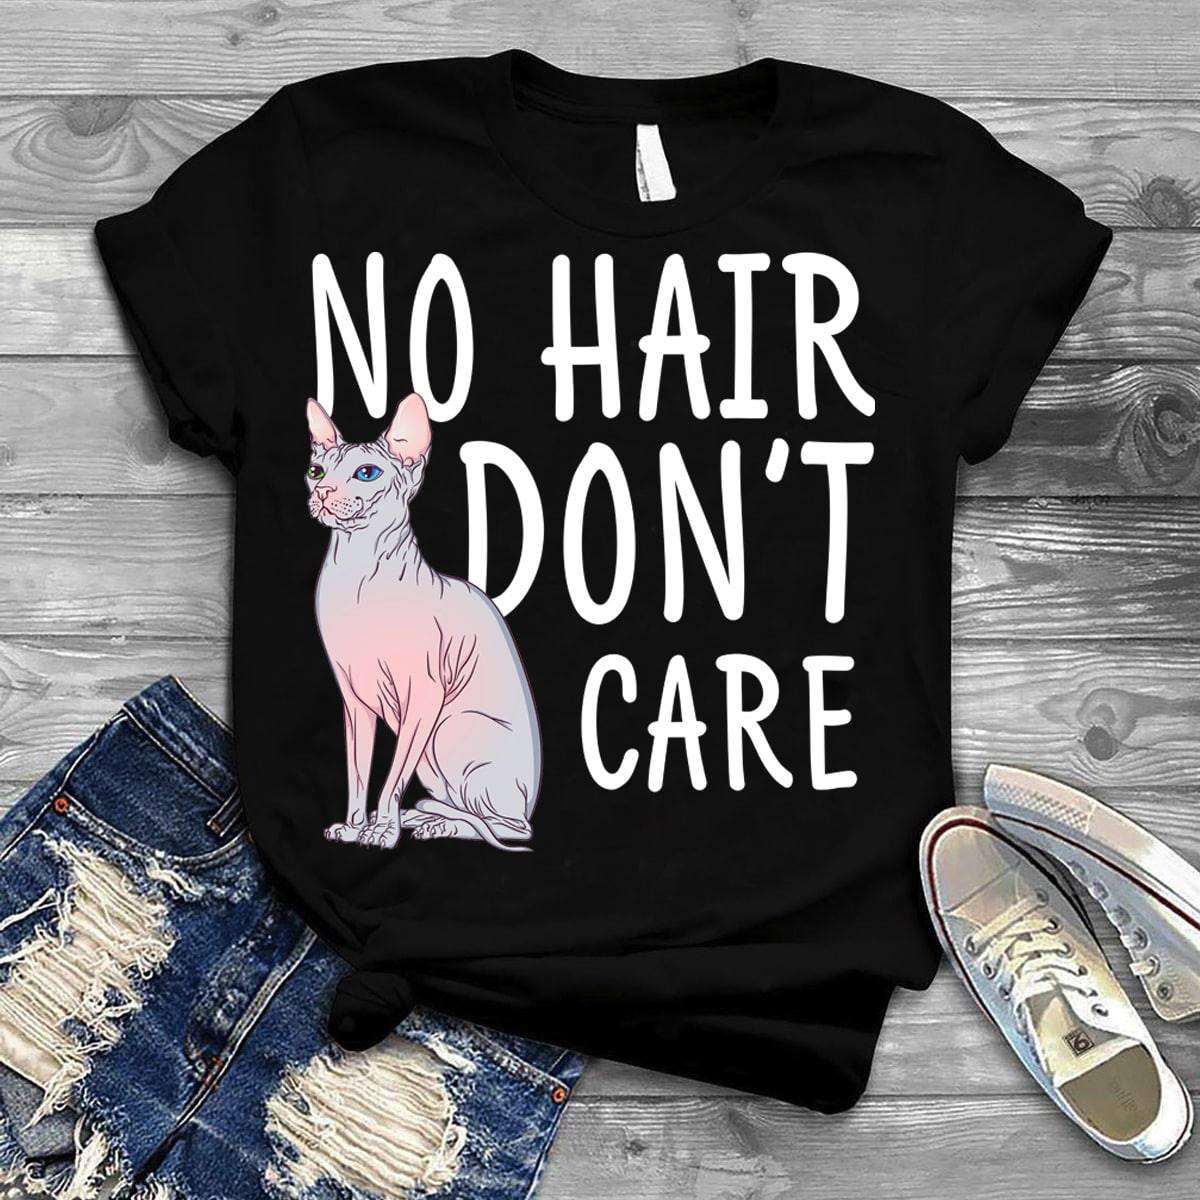 No hair don't care - T-shirt for cat lovers, Sphynx cat